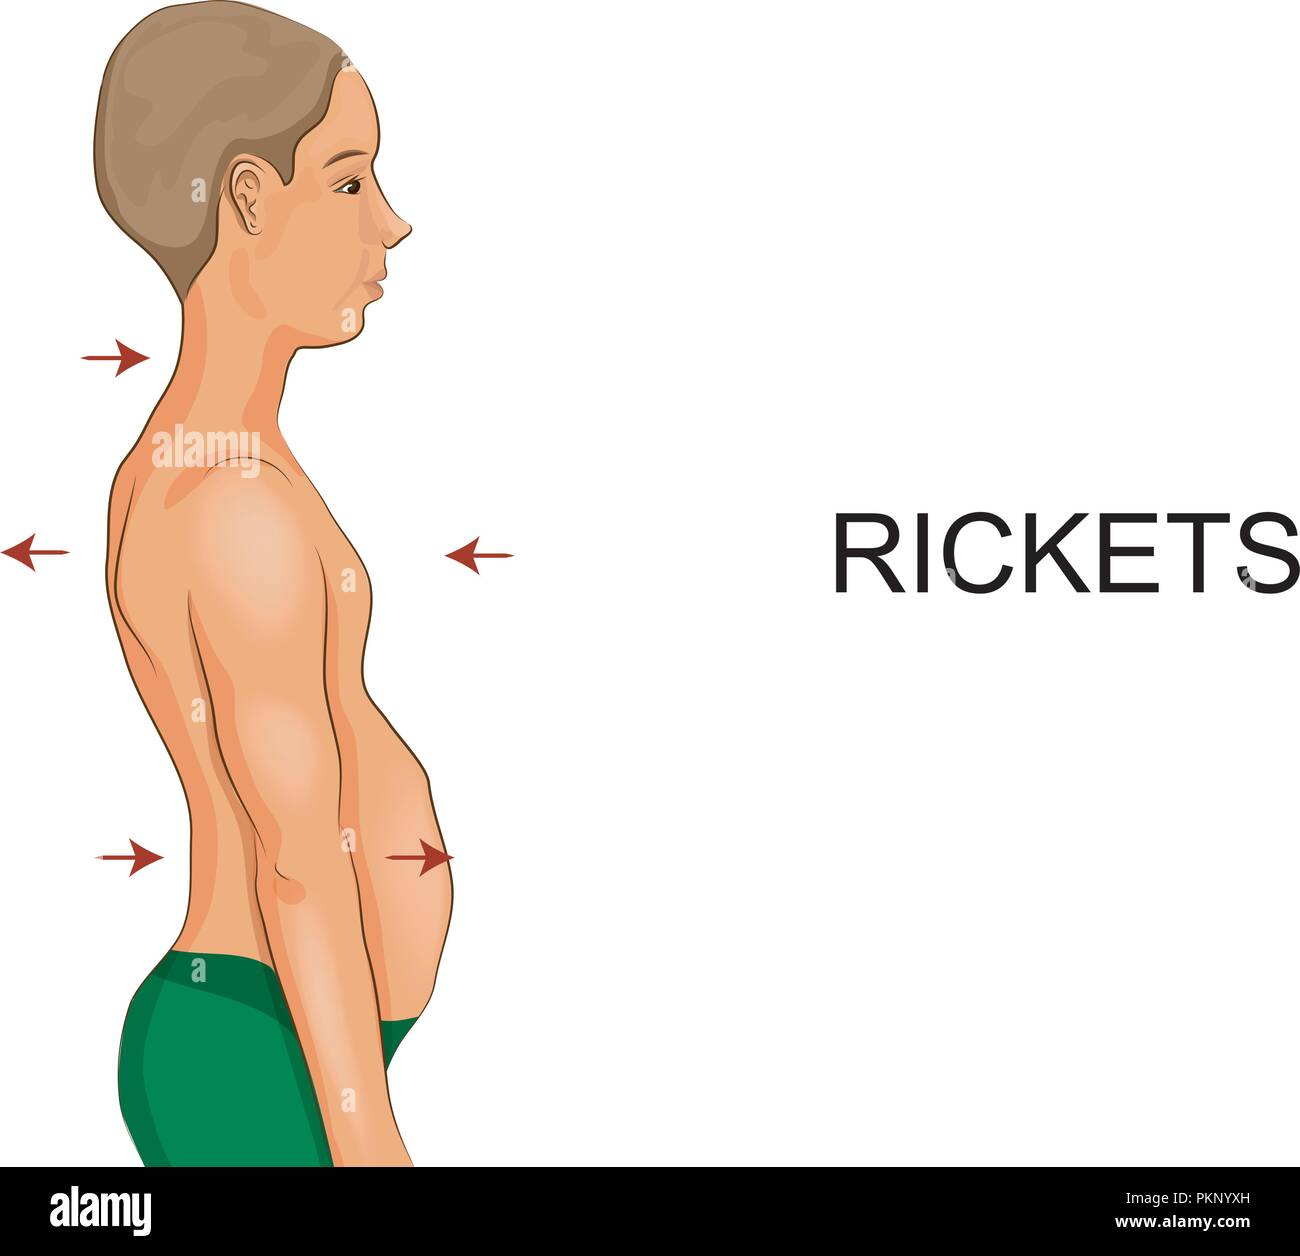 vector illustration of a boy with signs of rickets Stock Vector